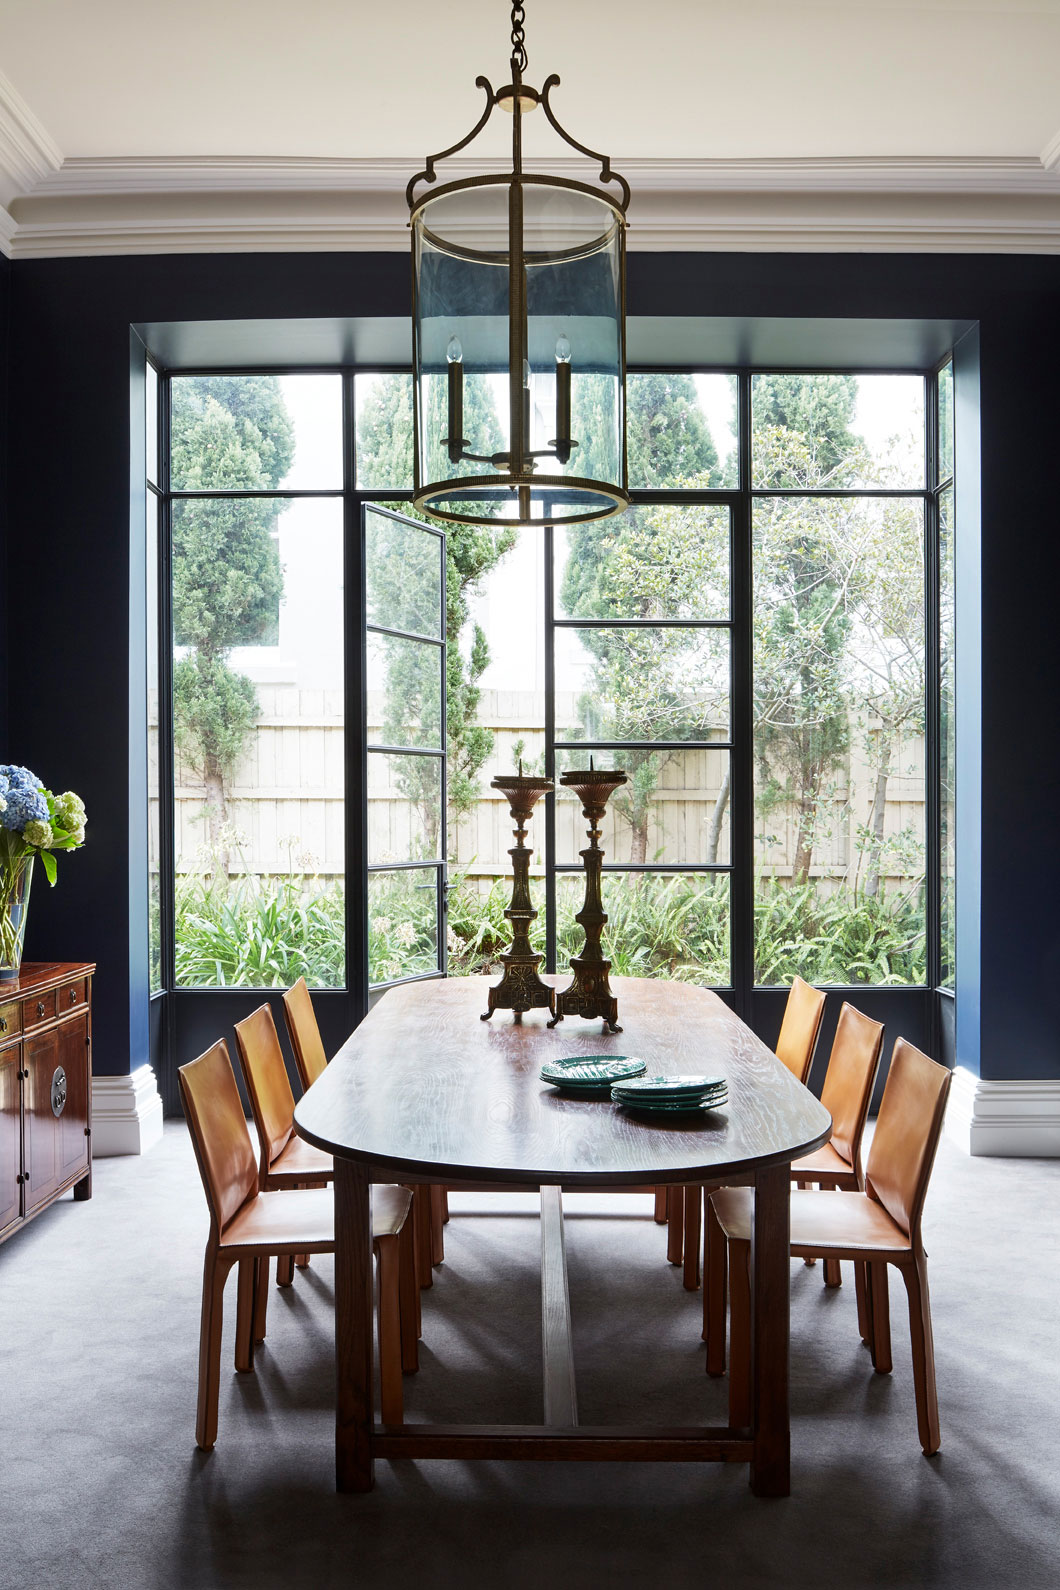 Dining room with dark walls and huge window